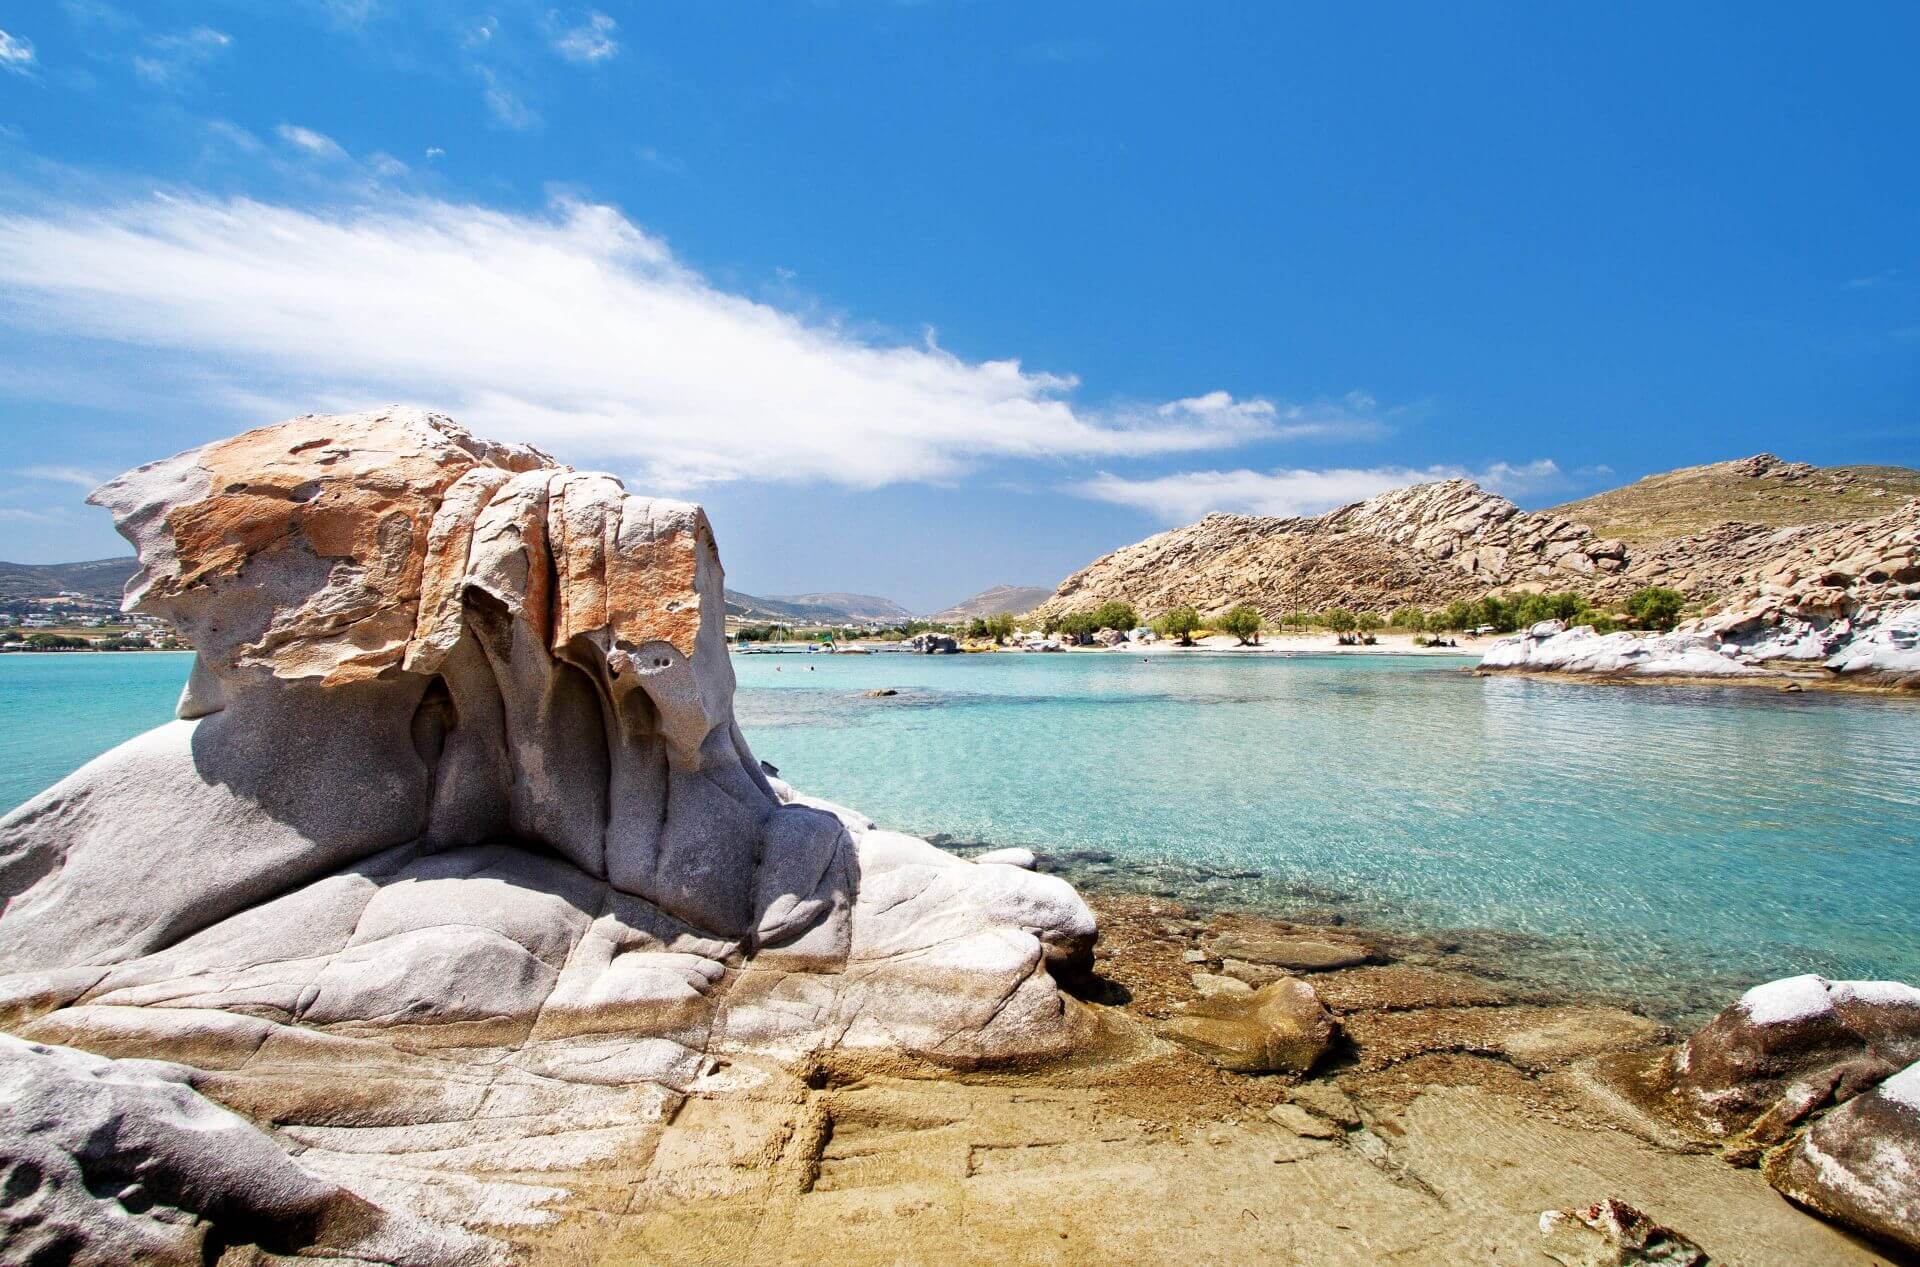 Kolymbithres beach, an impressive area on Paros island, with amazing rock formations